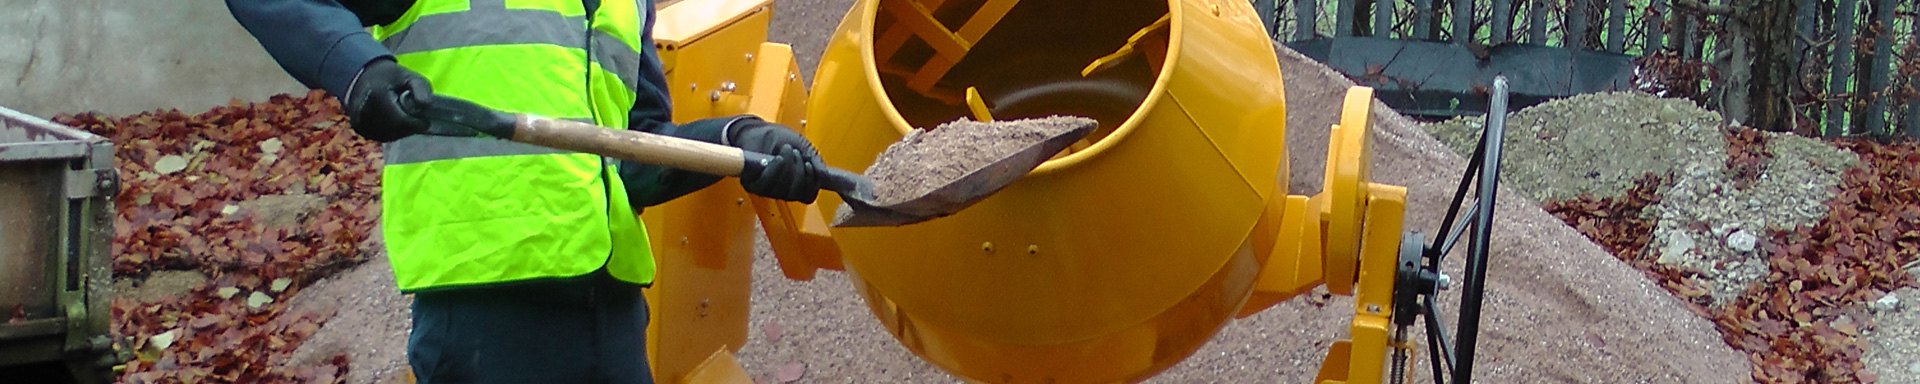 Concrete Mixing and Preparation | Drills, Bits, Drums, Pans - TOOLSID.com